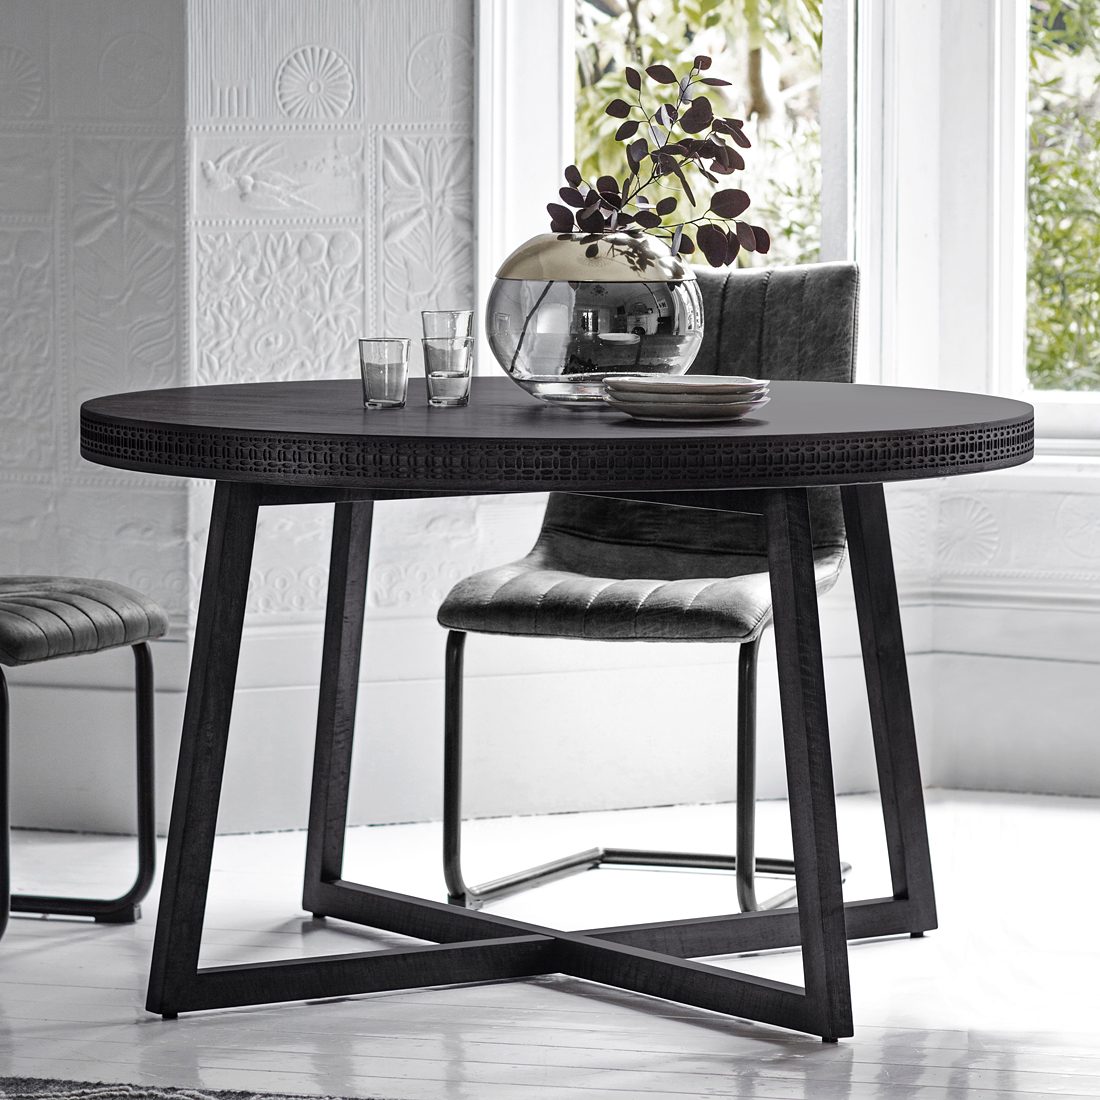 Carved Round Dining Table Black, Round Dining Table Black